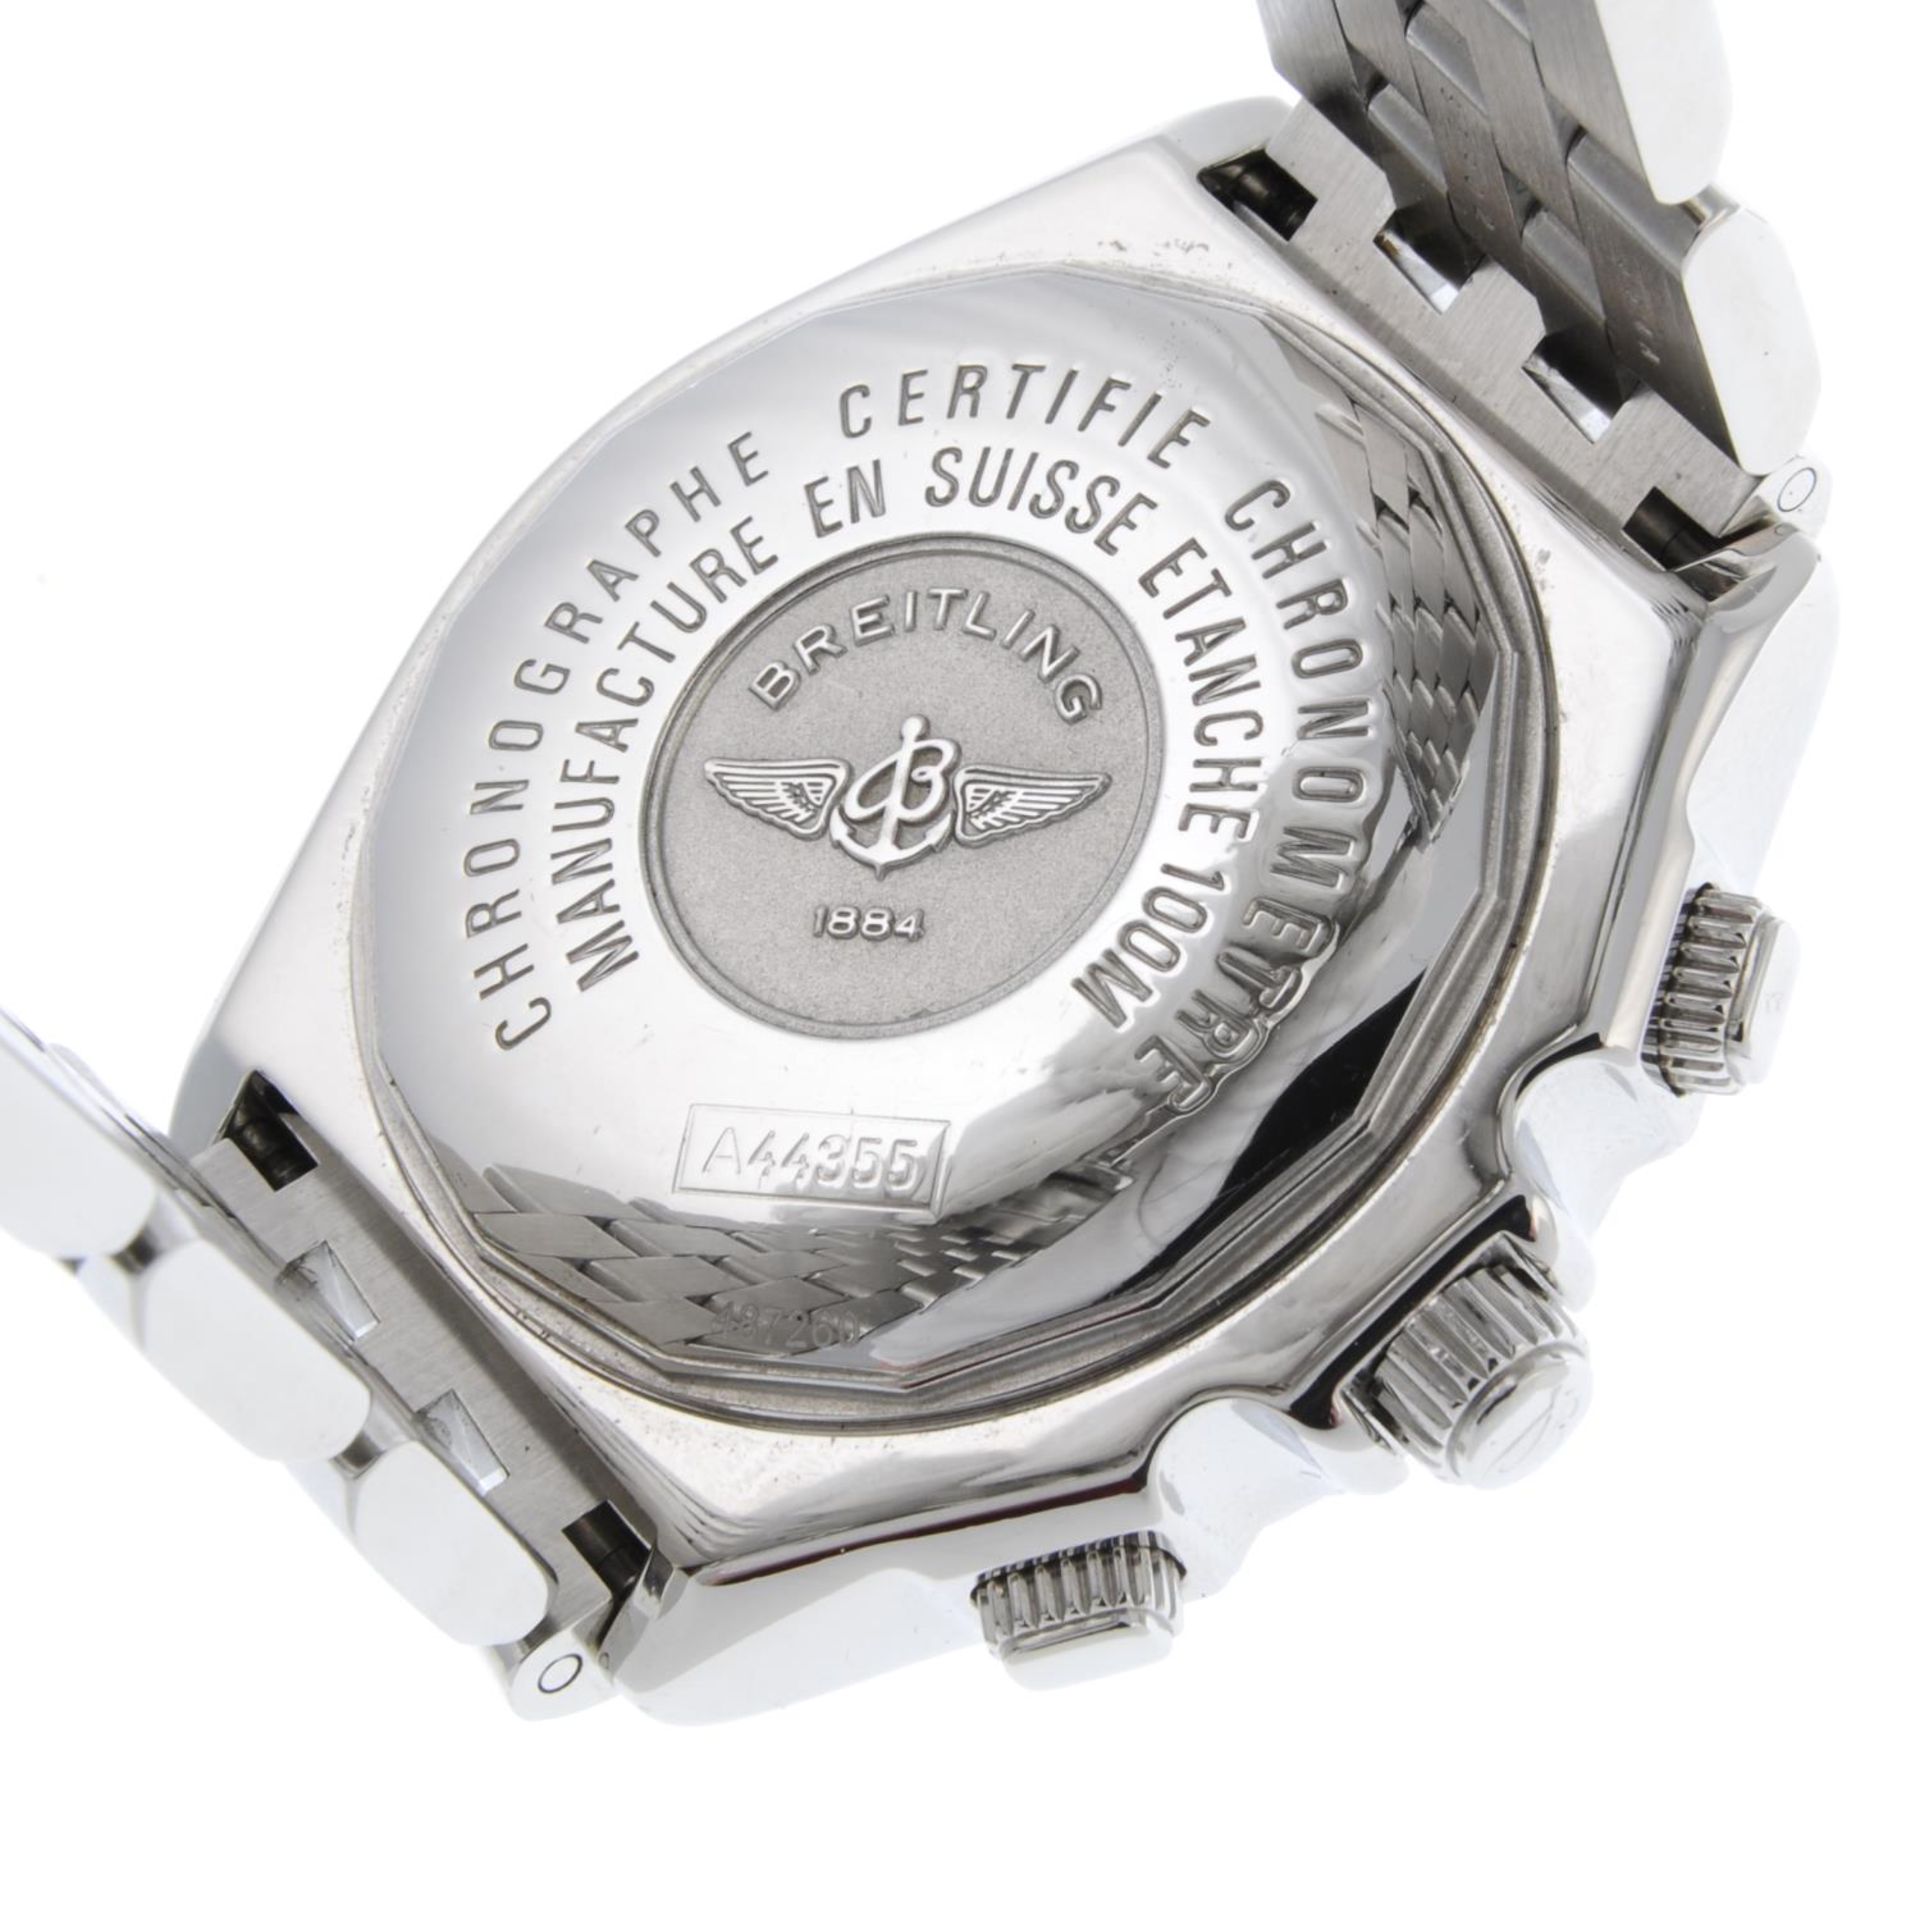 BREITLING - a Windrider CrosswindSpecial chronograph bracelet watch.Stainless steel case with - Image 5 of 6